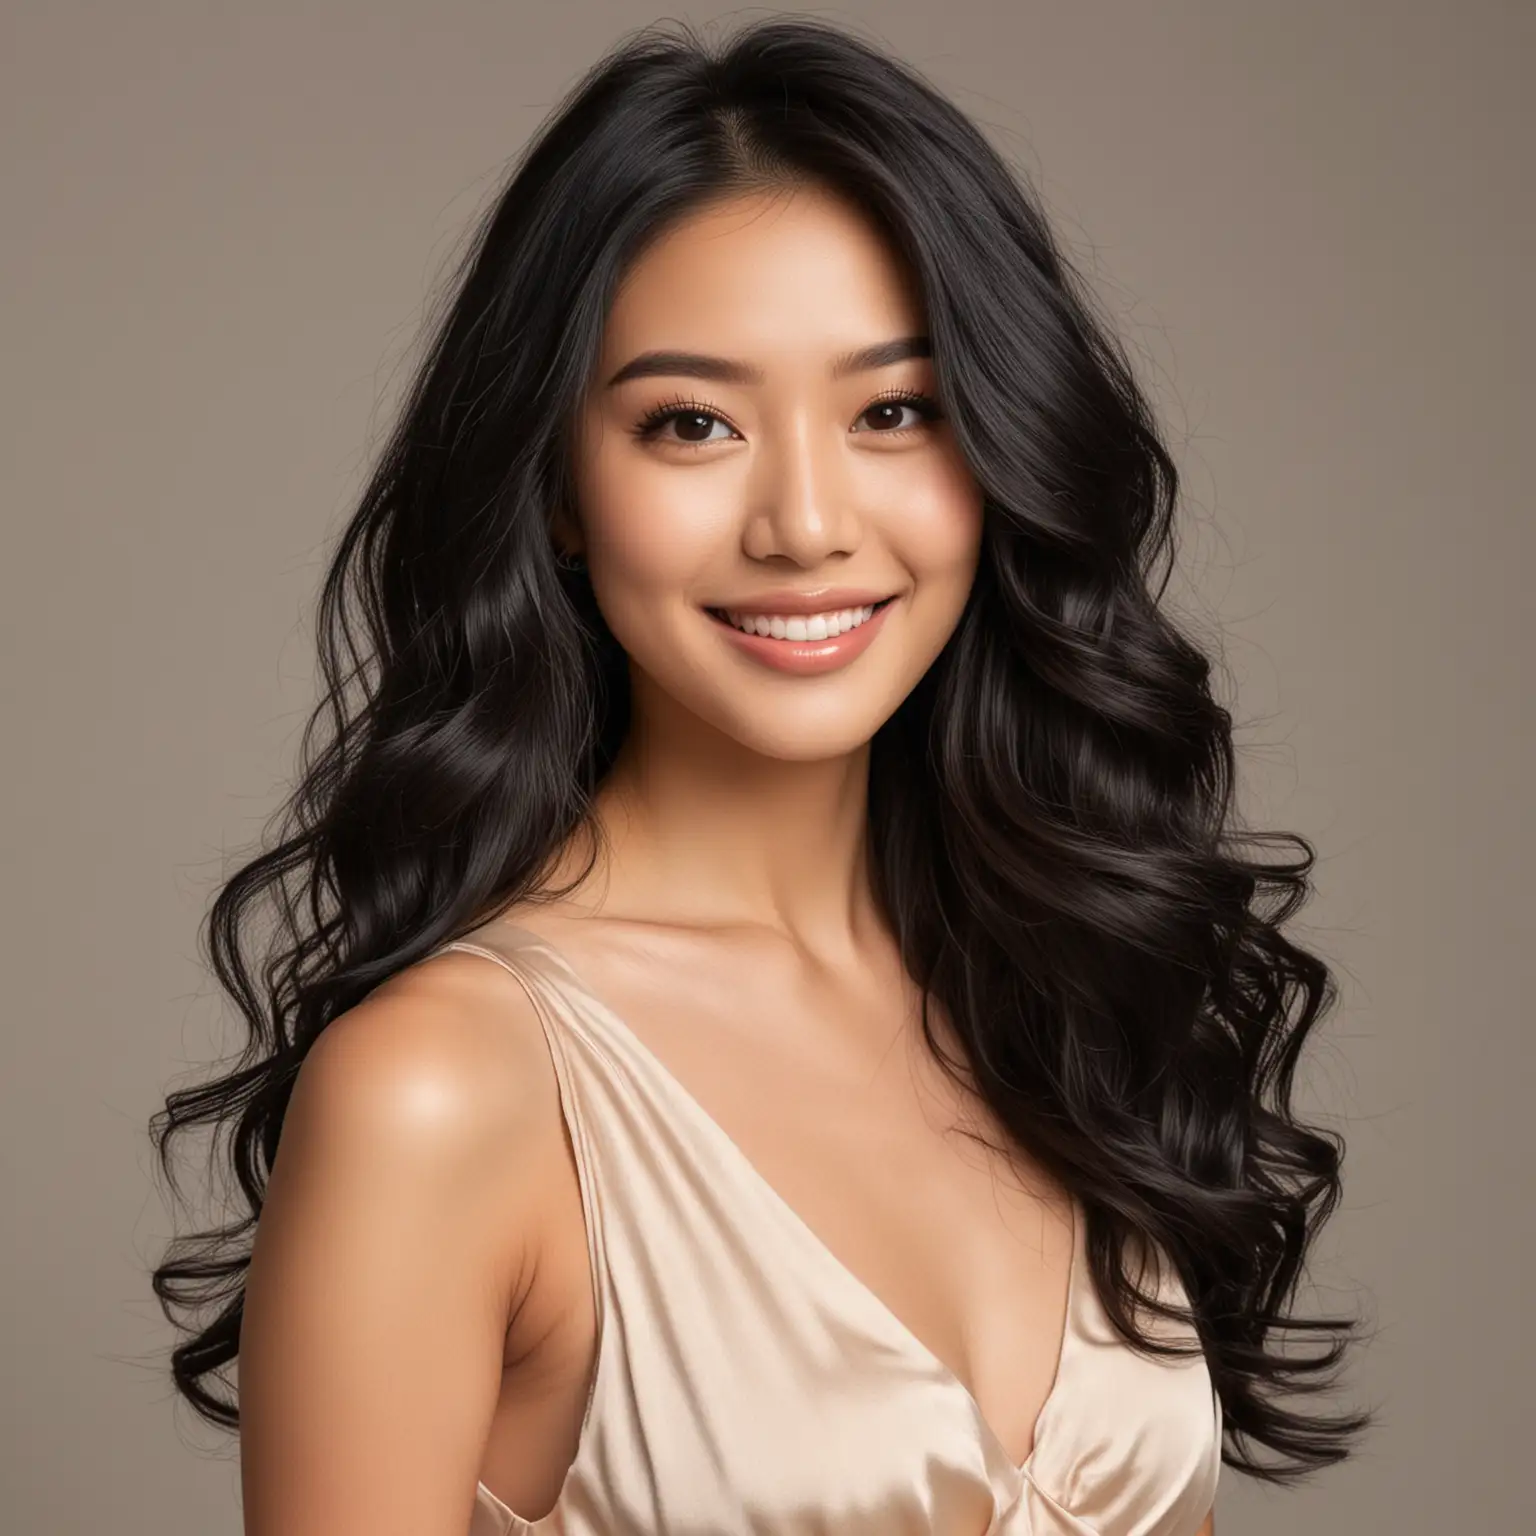 asian hair model in long wavy black hair with face framing layers. She is smiling and wearing a satin beige dress